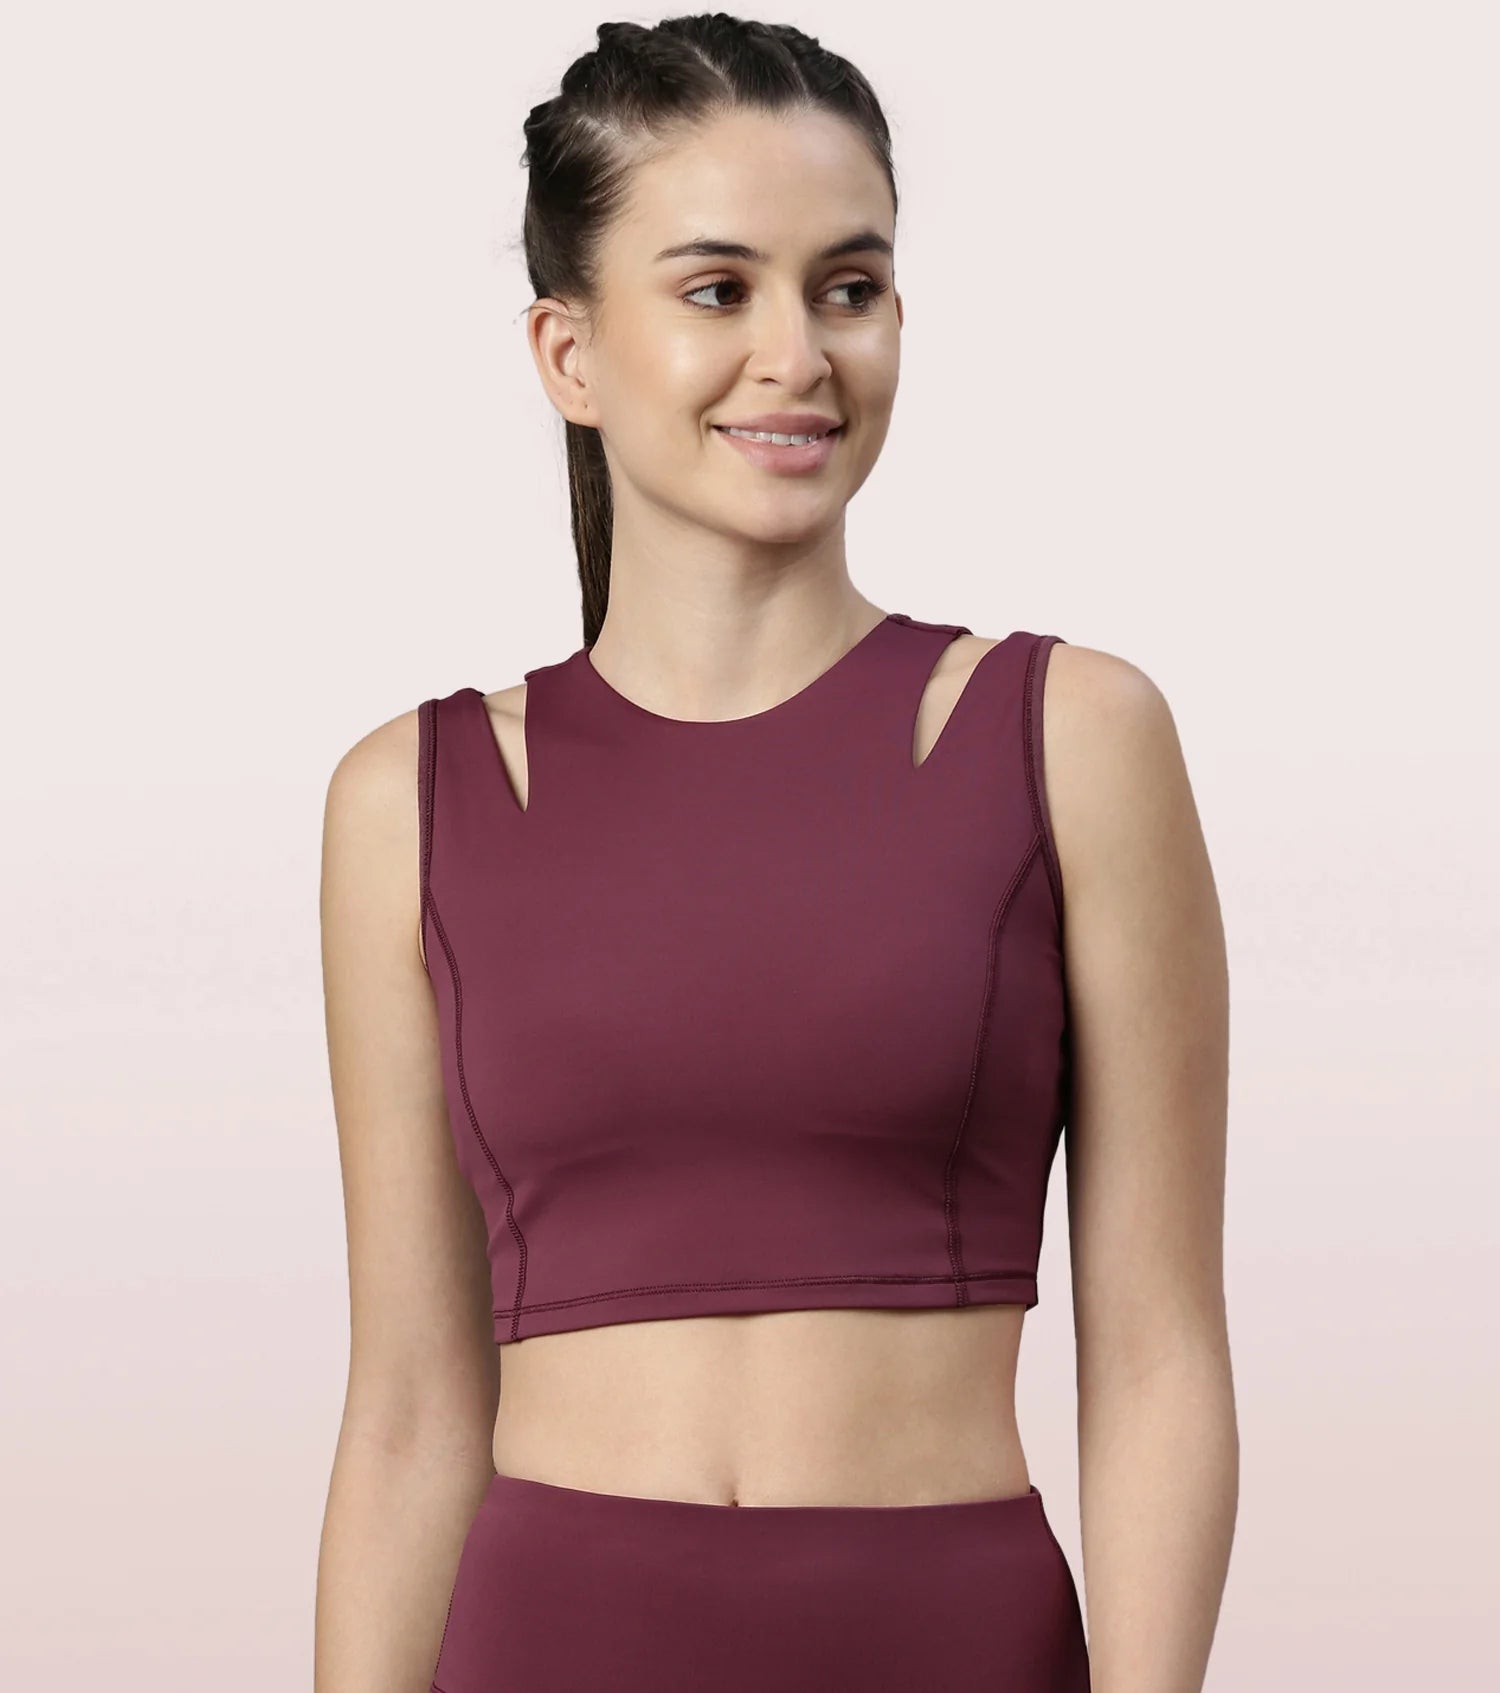 Enamor AB75 M Frame No Bounce Full Support Cotton Bra for Women -  Non-Padded Non-Wired & Full Coverage with Cooling Technology